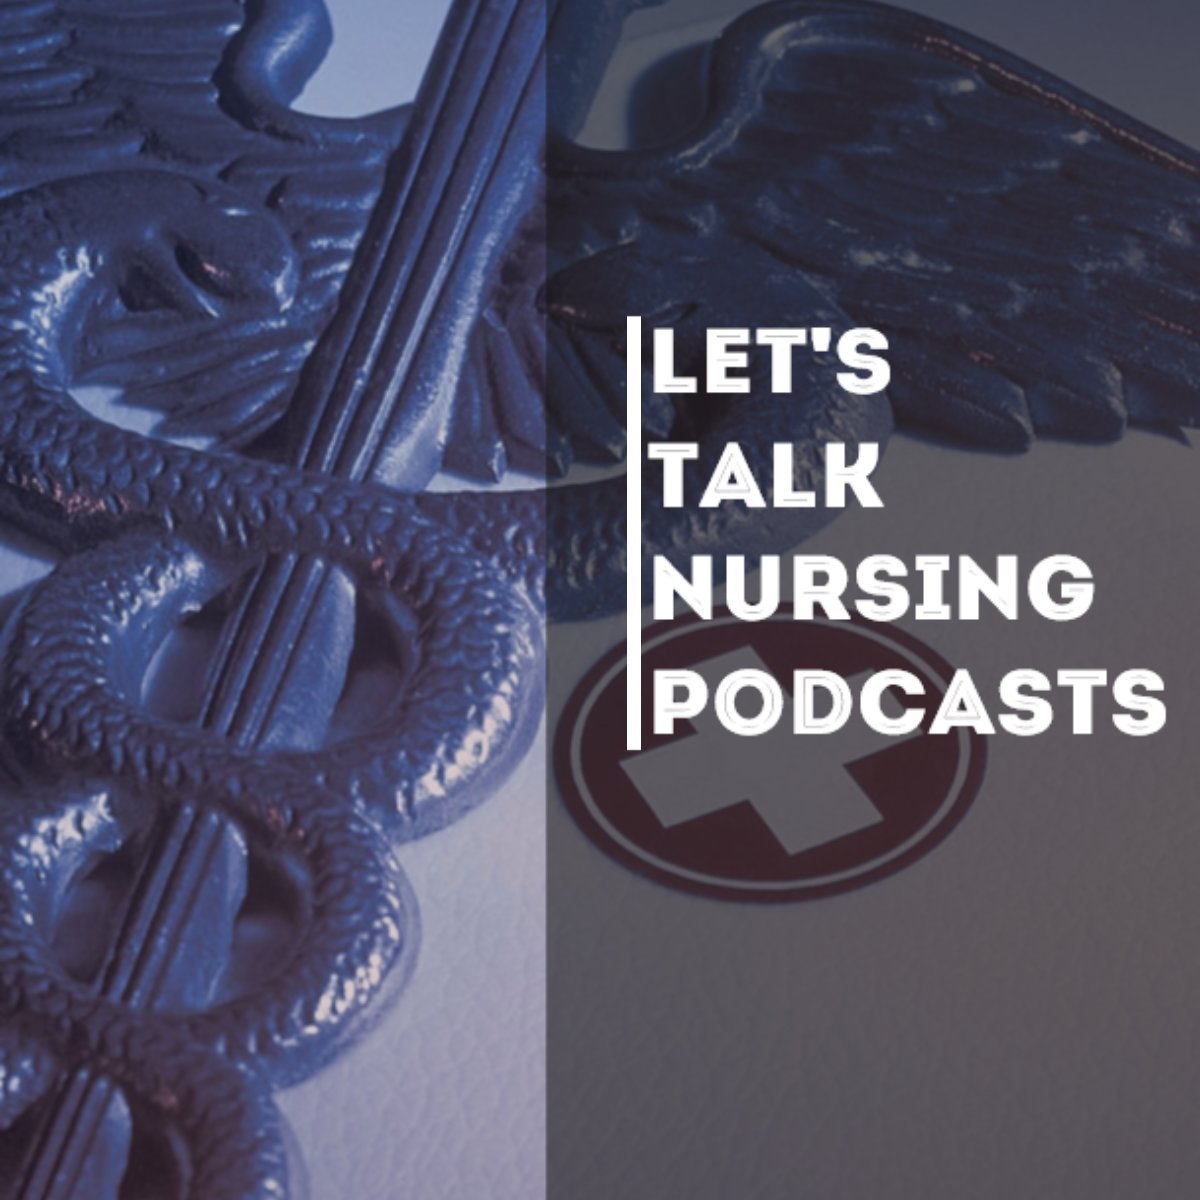 Suite of podcasts focused on clinical, legal, and regulatory topics in #nursing. Let’s Talk is a product of Carson Company, a nursing consultancy.